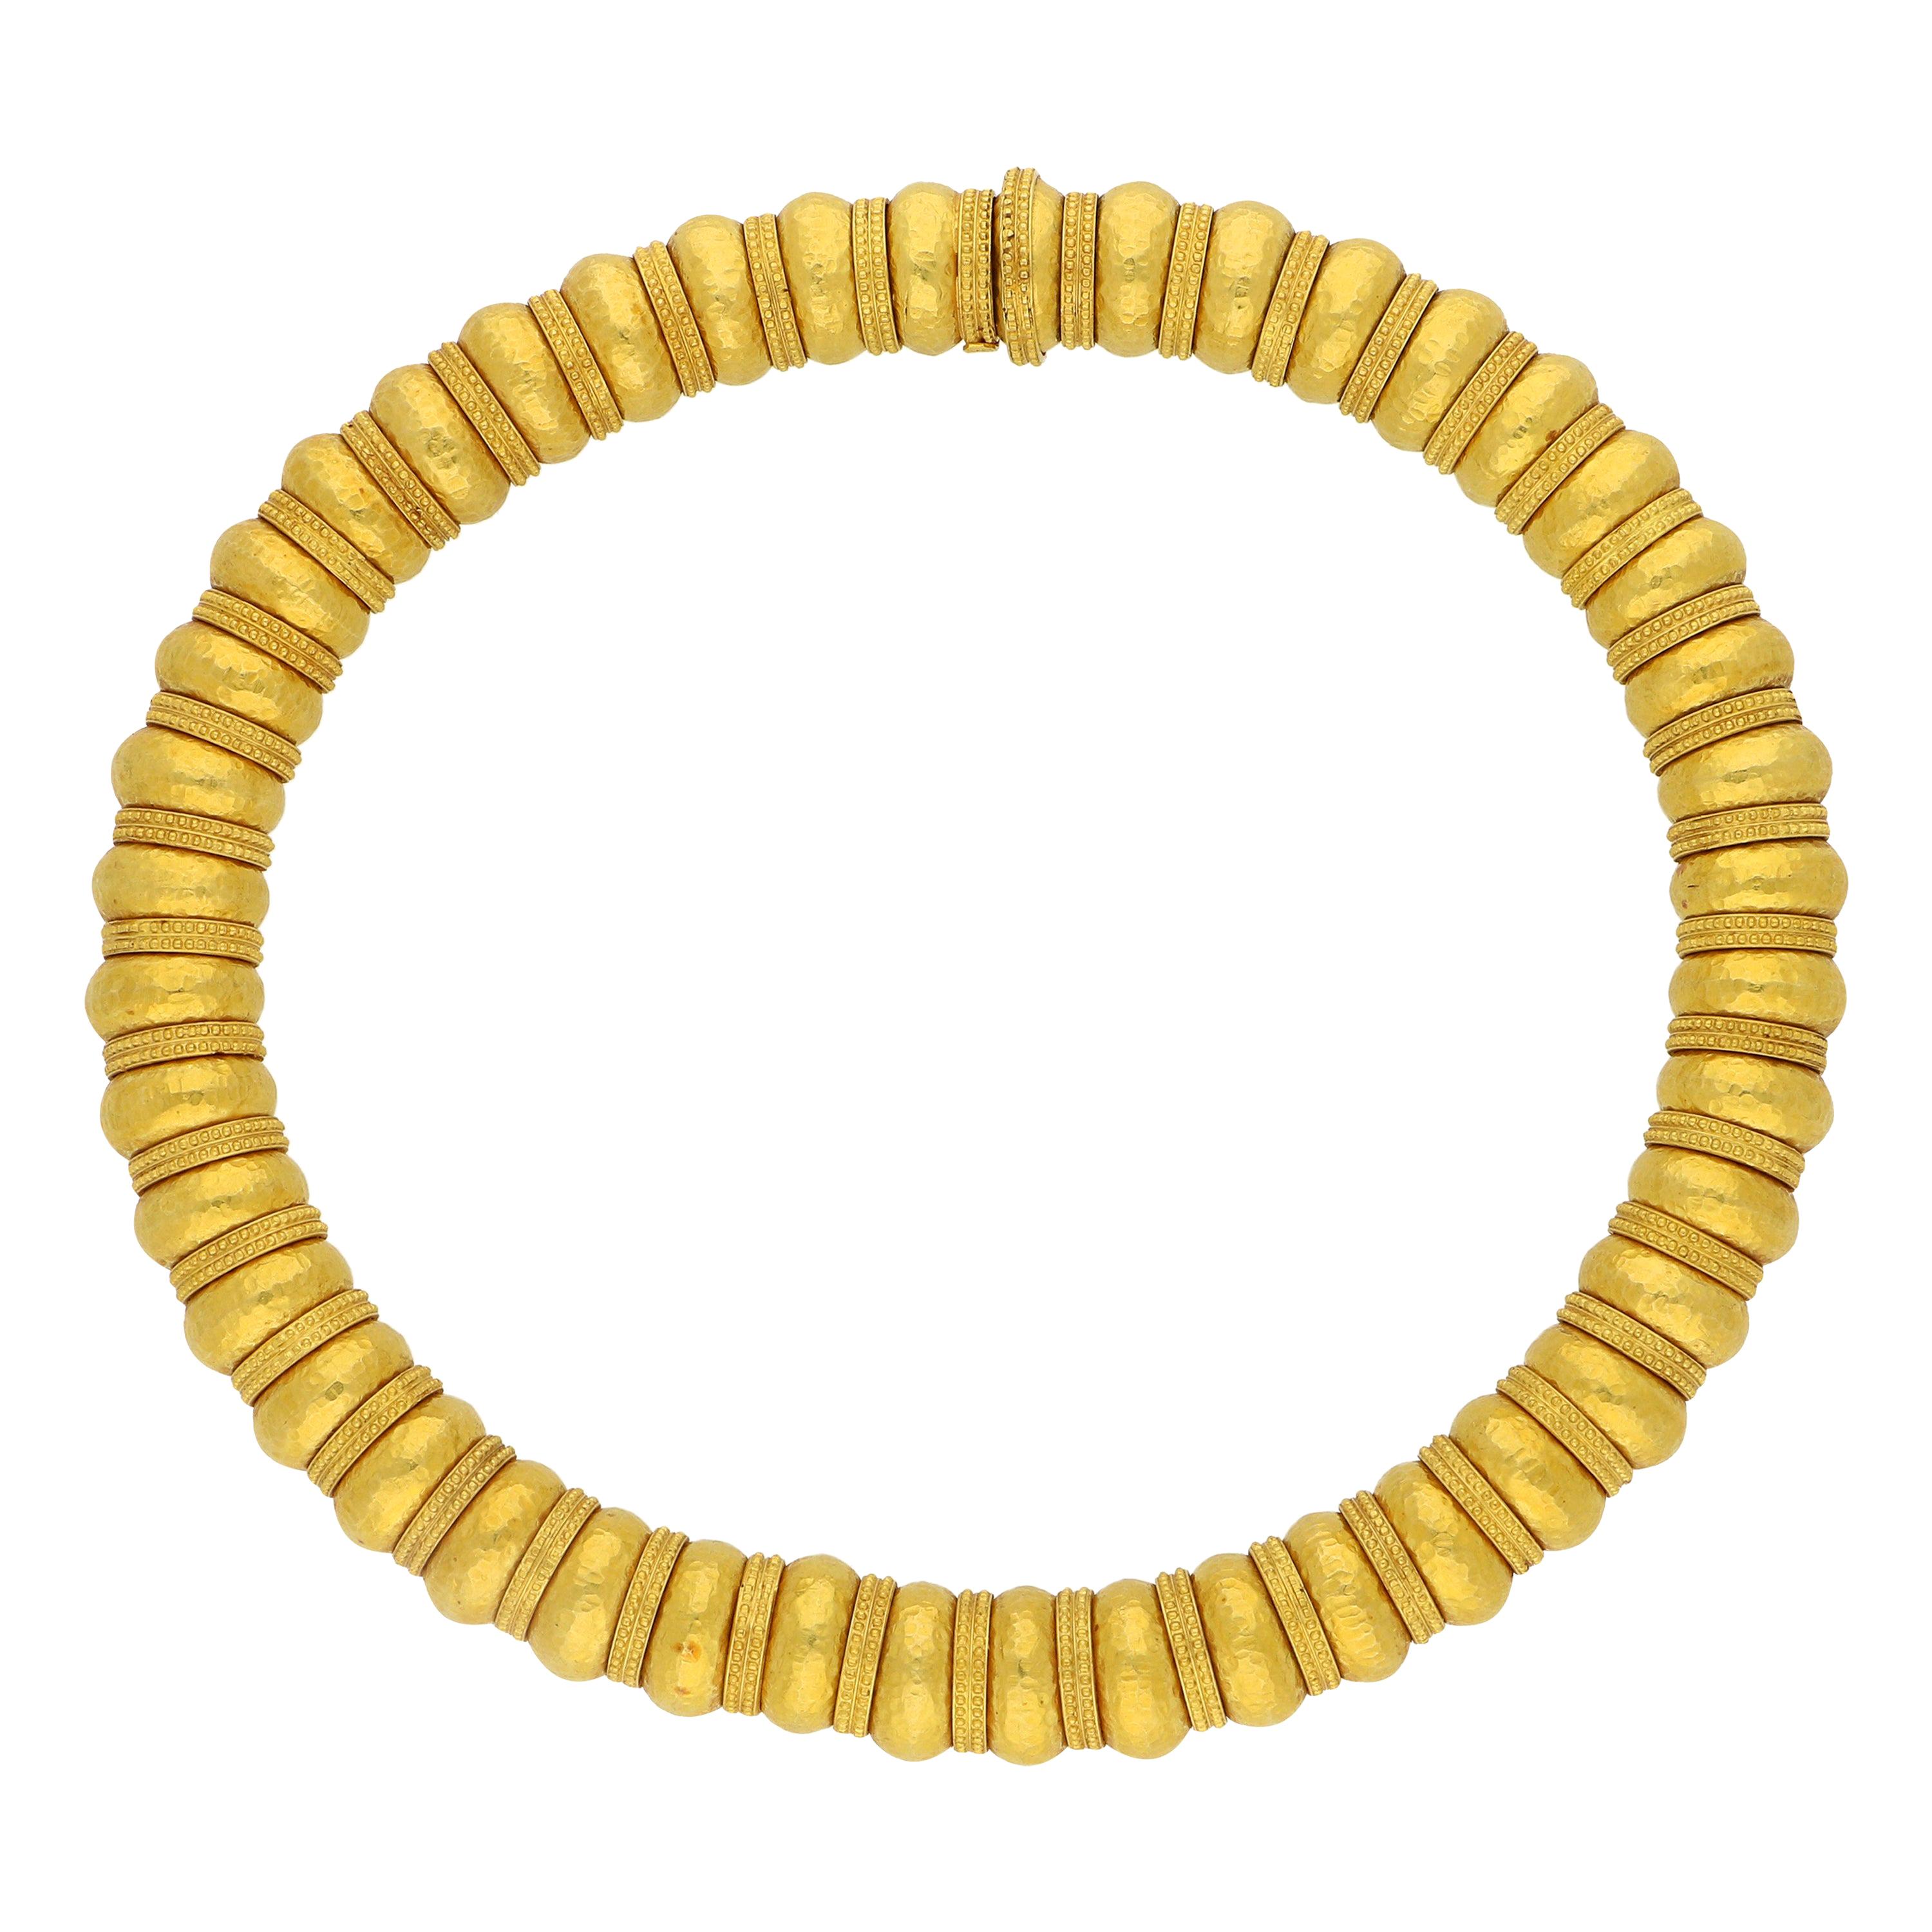 Ilias Lalaounis Gold Bead Necklace with Hammered Finish and Textured Rondels